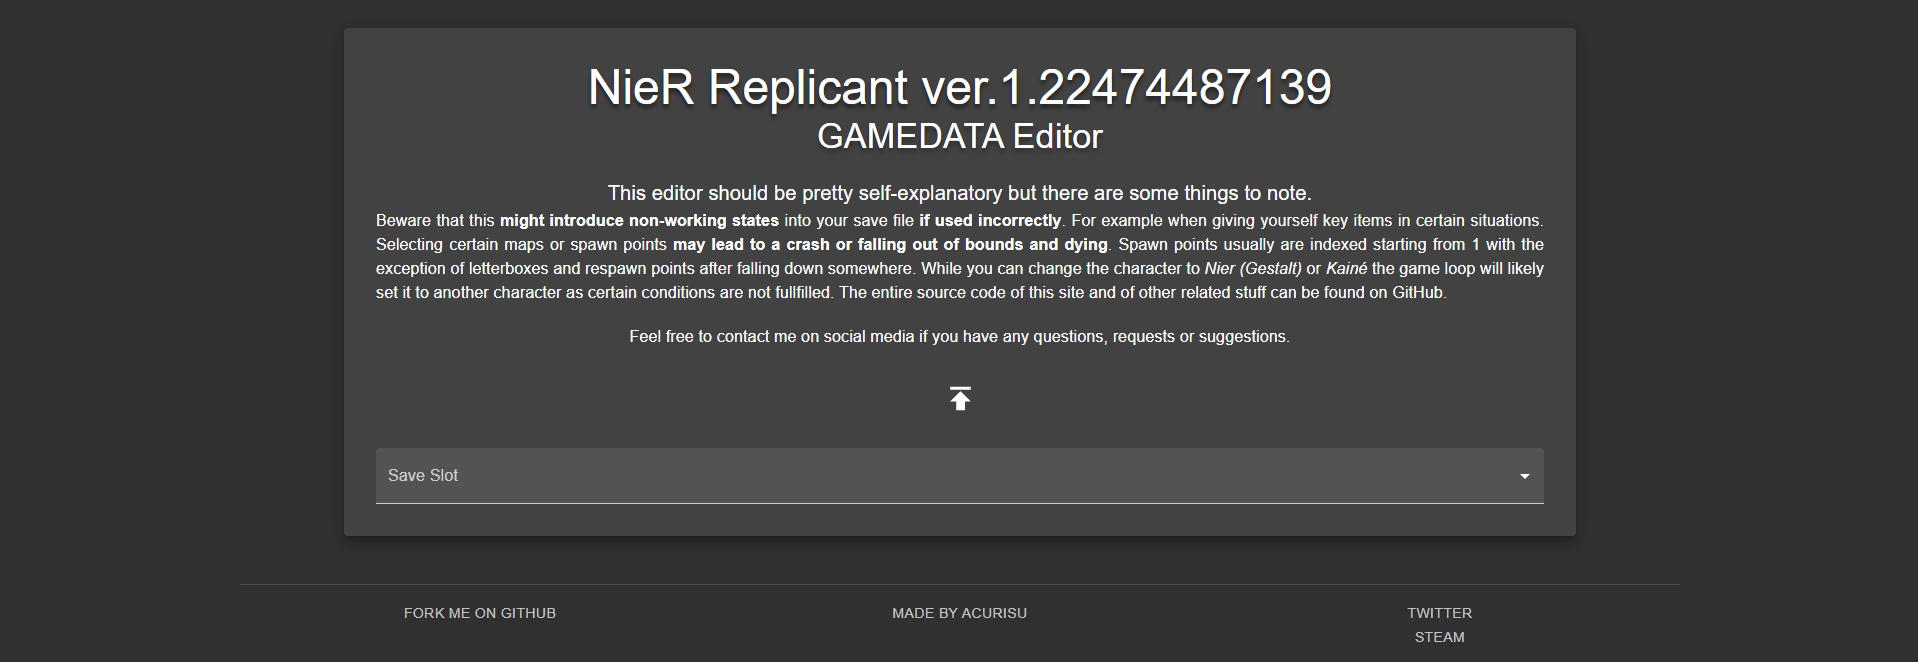 NieR Replicant ver.1.22474487139... - How to edit your save file (GAMEDATA)